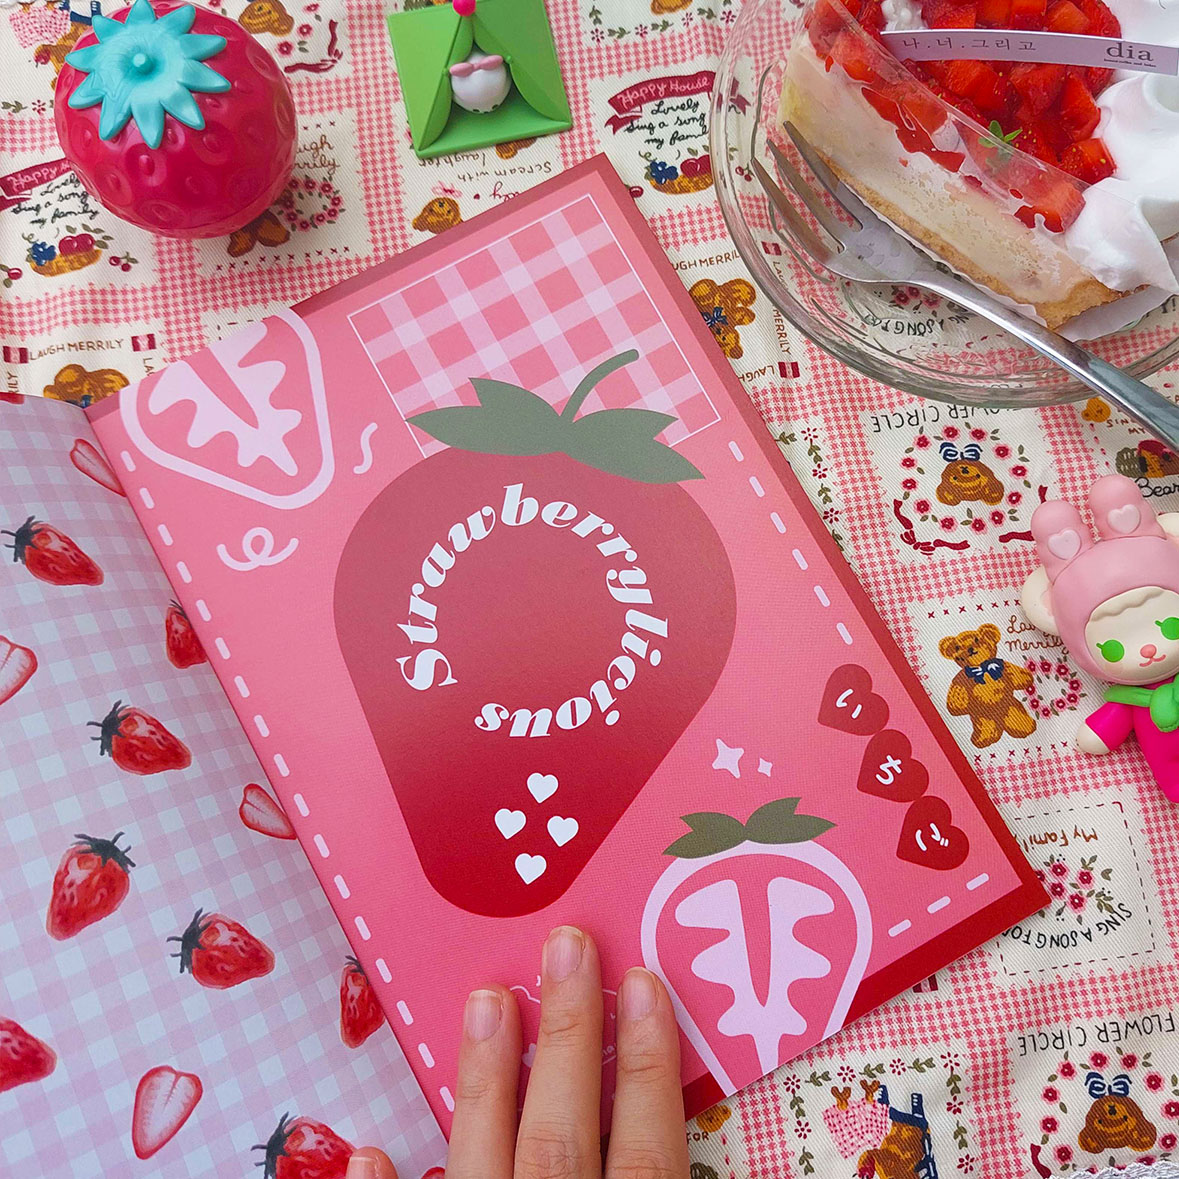 taking pics of my strawberrylicious artbook today!!!